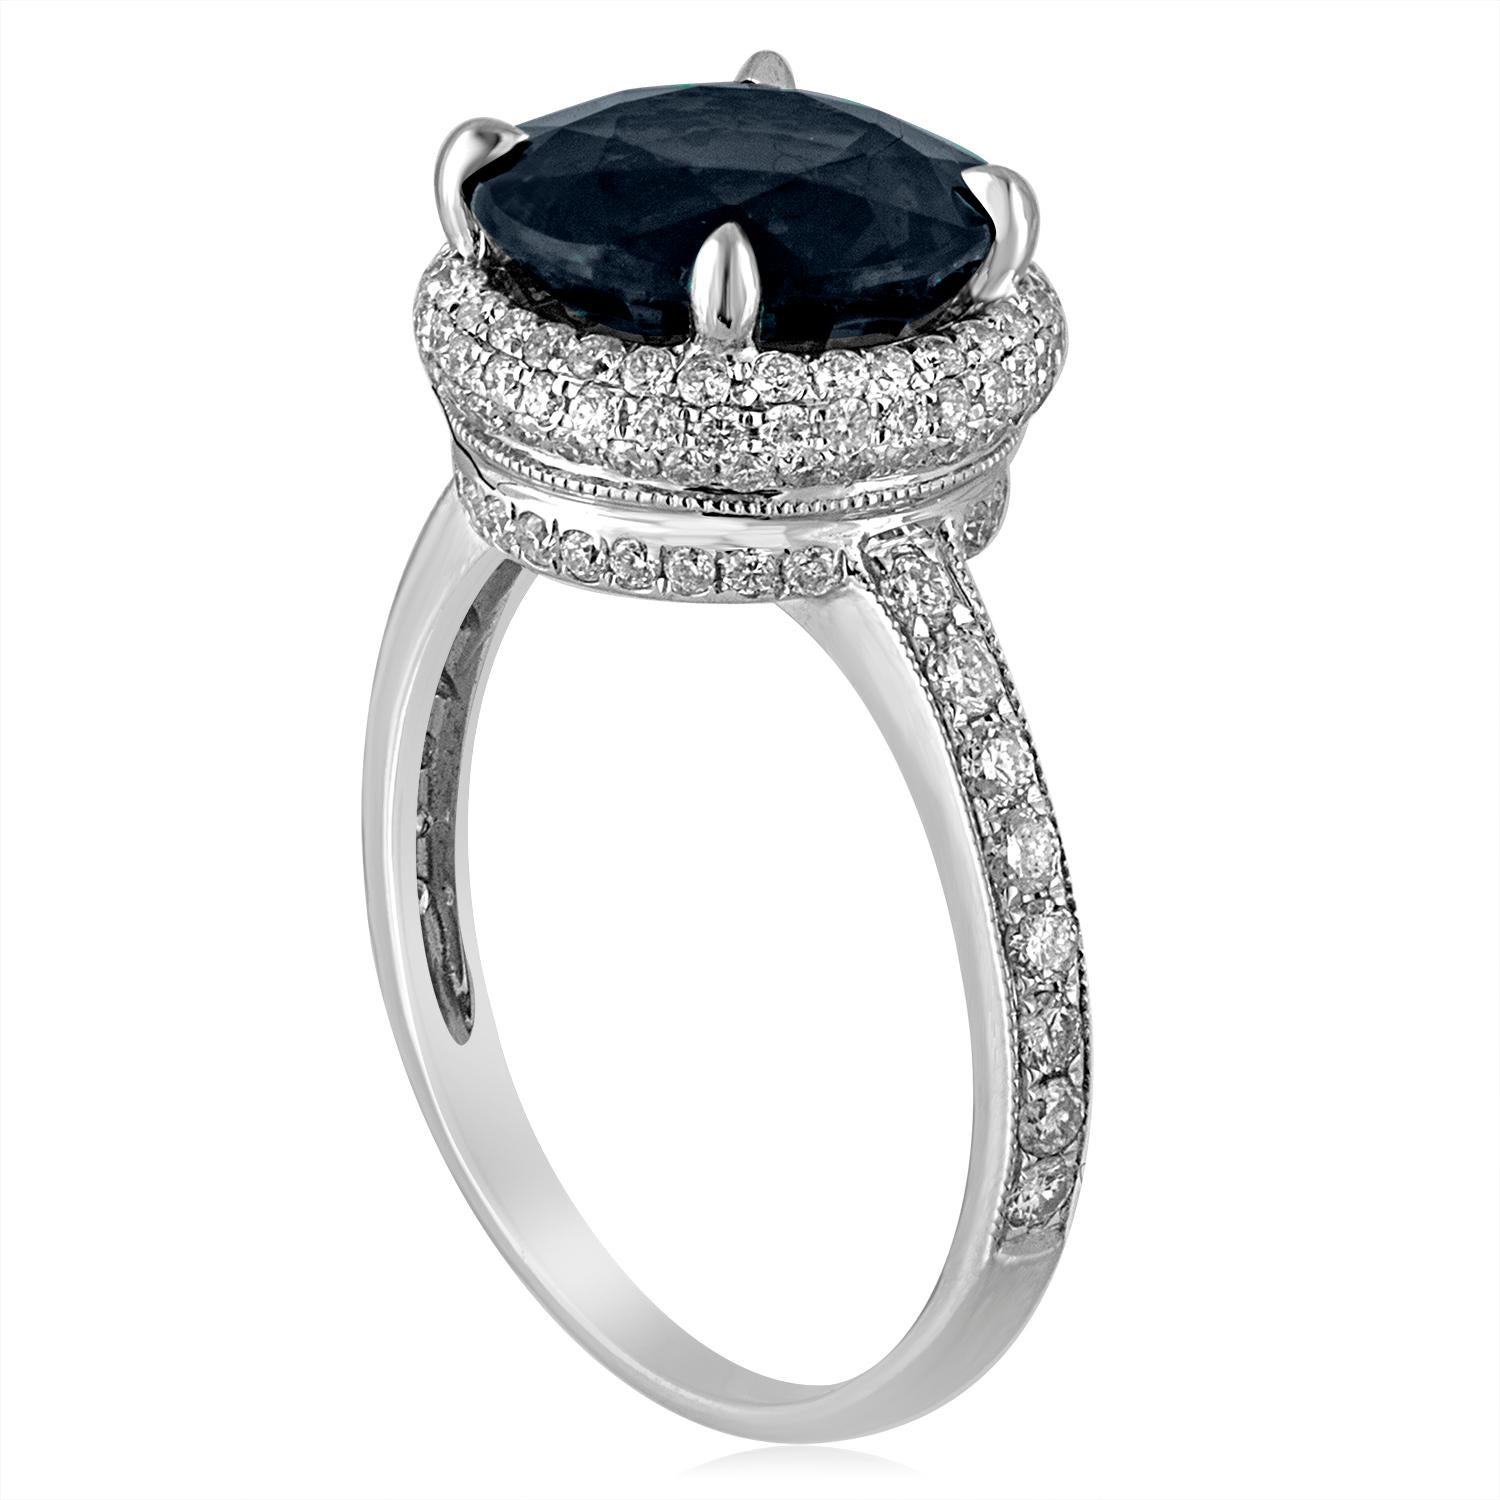 One-Of-A-Kind Sapphire Ring.
The ring is 18K White Gold.
There are 0.91 Carats in Diamonds F/G VS/SI.
The center stone is 4.98 Carat Round Greenish Blue (Teal) Sapphire.
The sapphire has NO HEAT and is certified by LAPIS.
Natural Inclusions inside